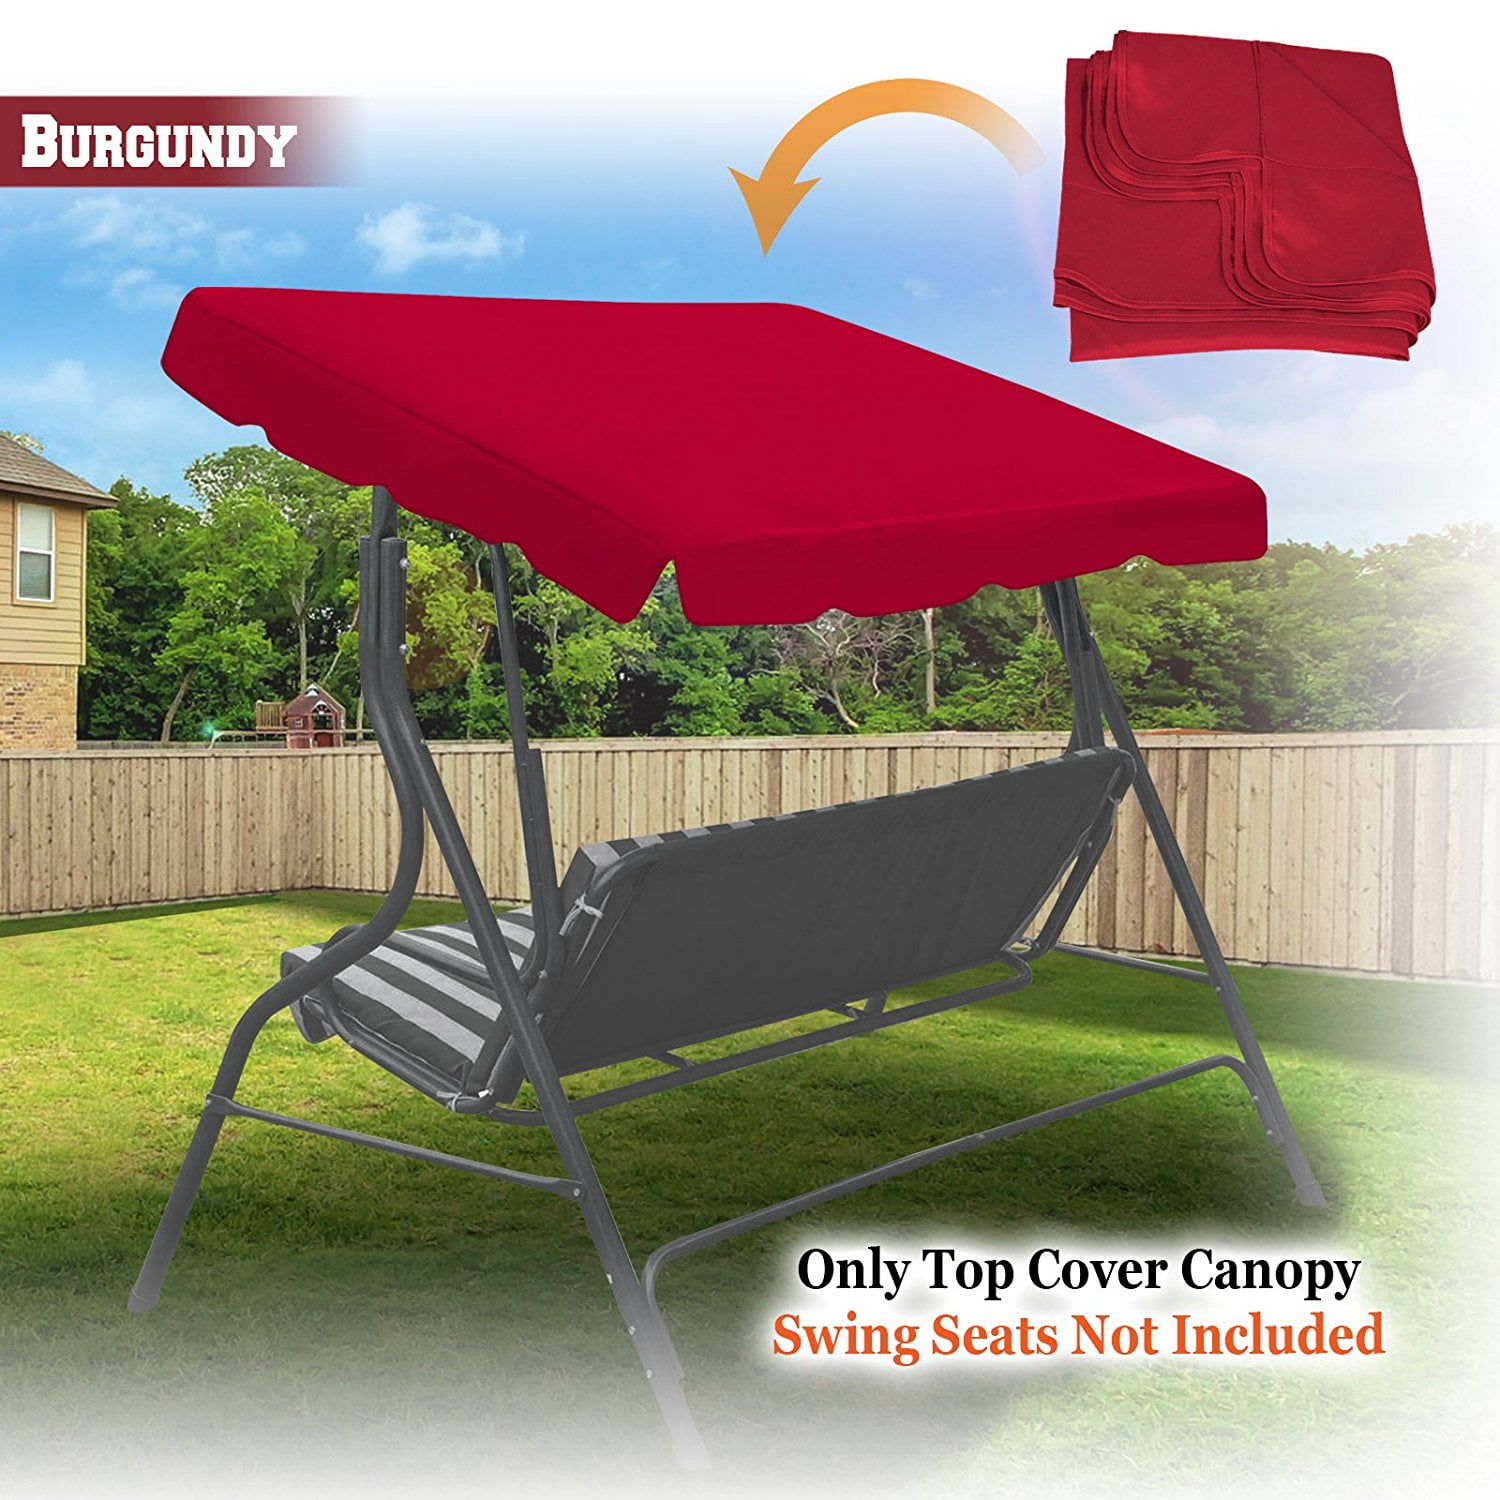 Outdoor Swing Cover Replacement Canopy Top for Porch Patio Garden Pool Seat 